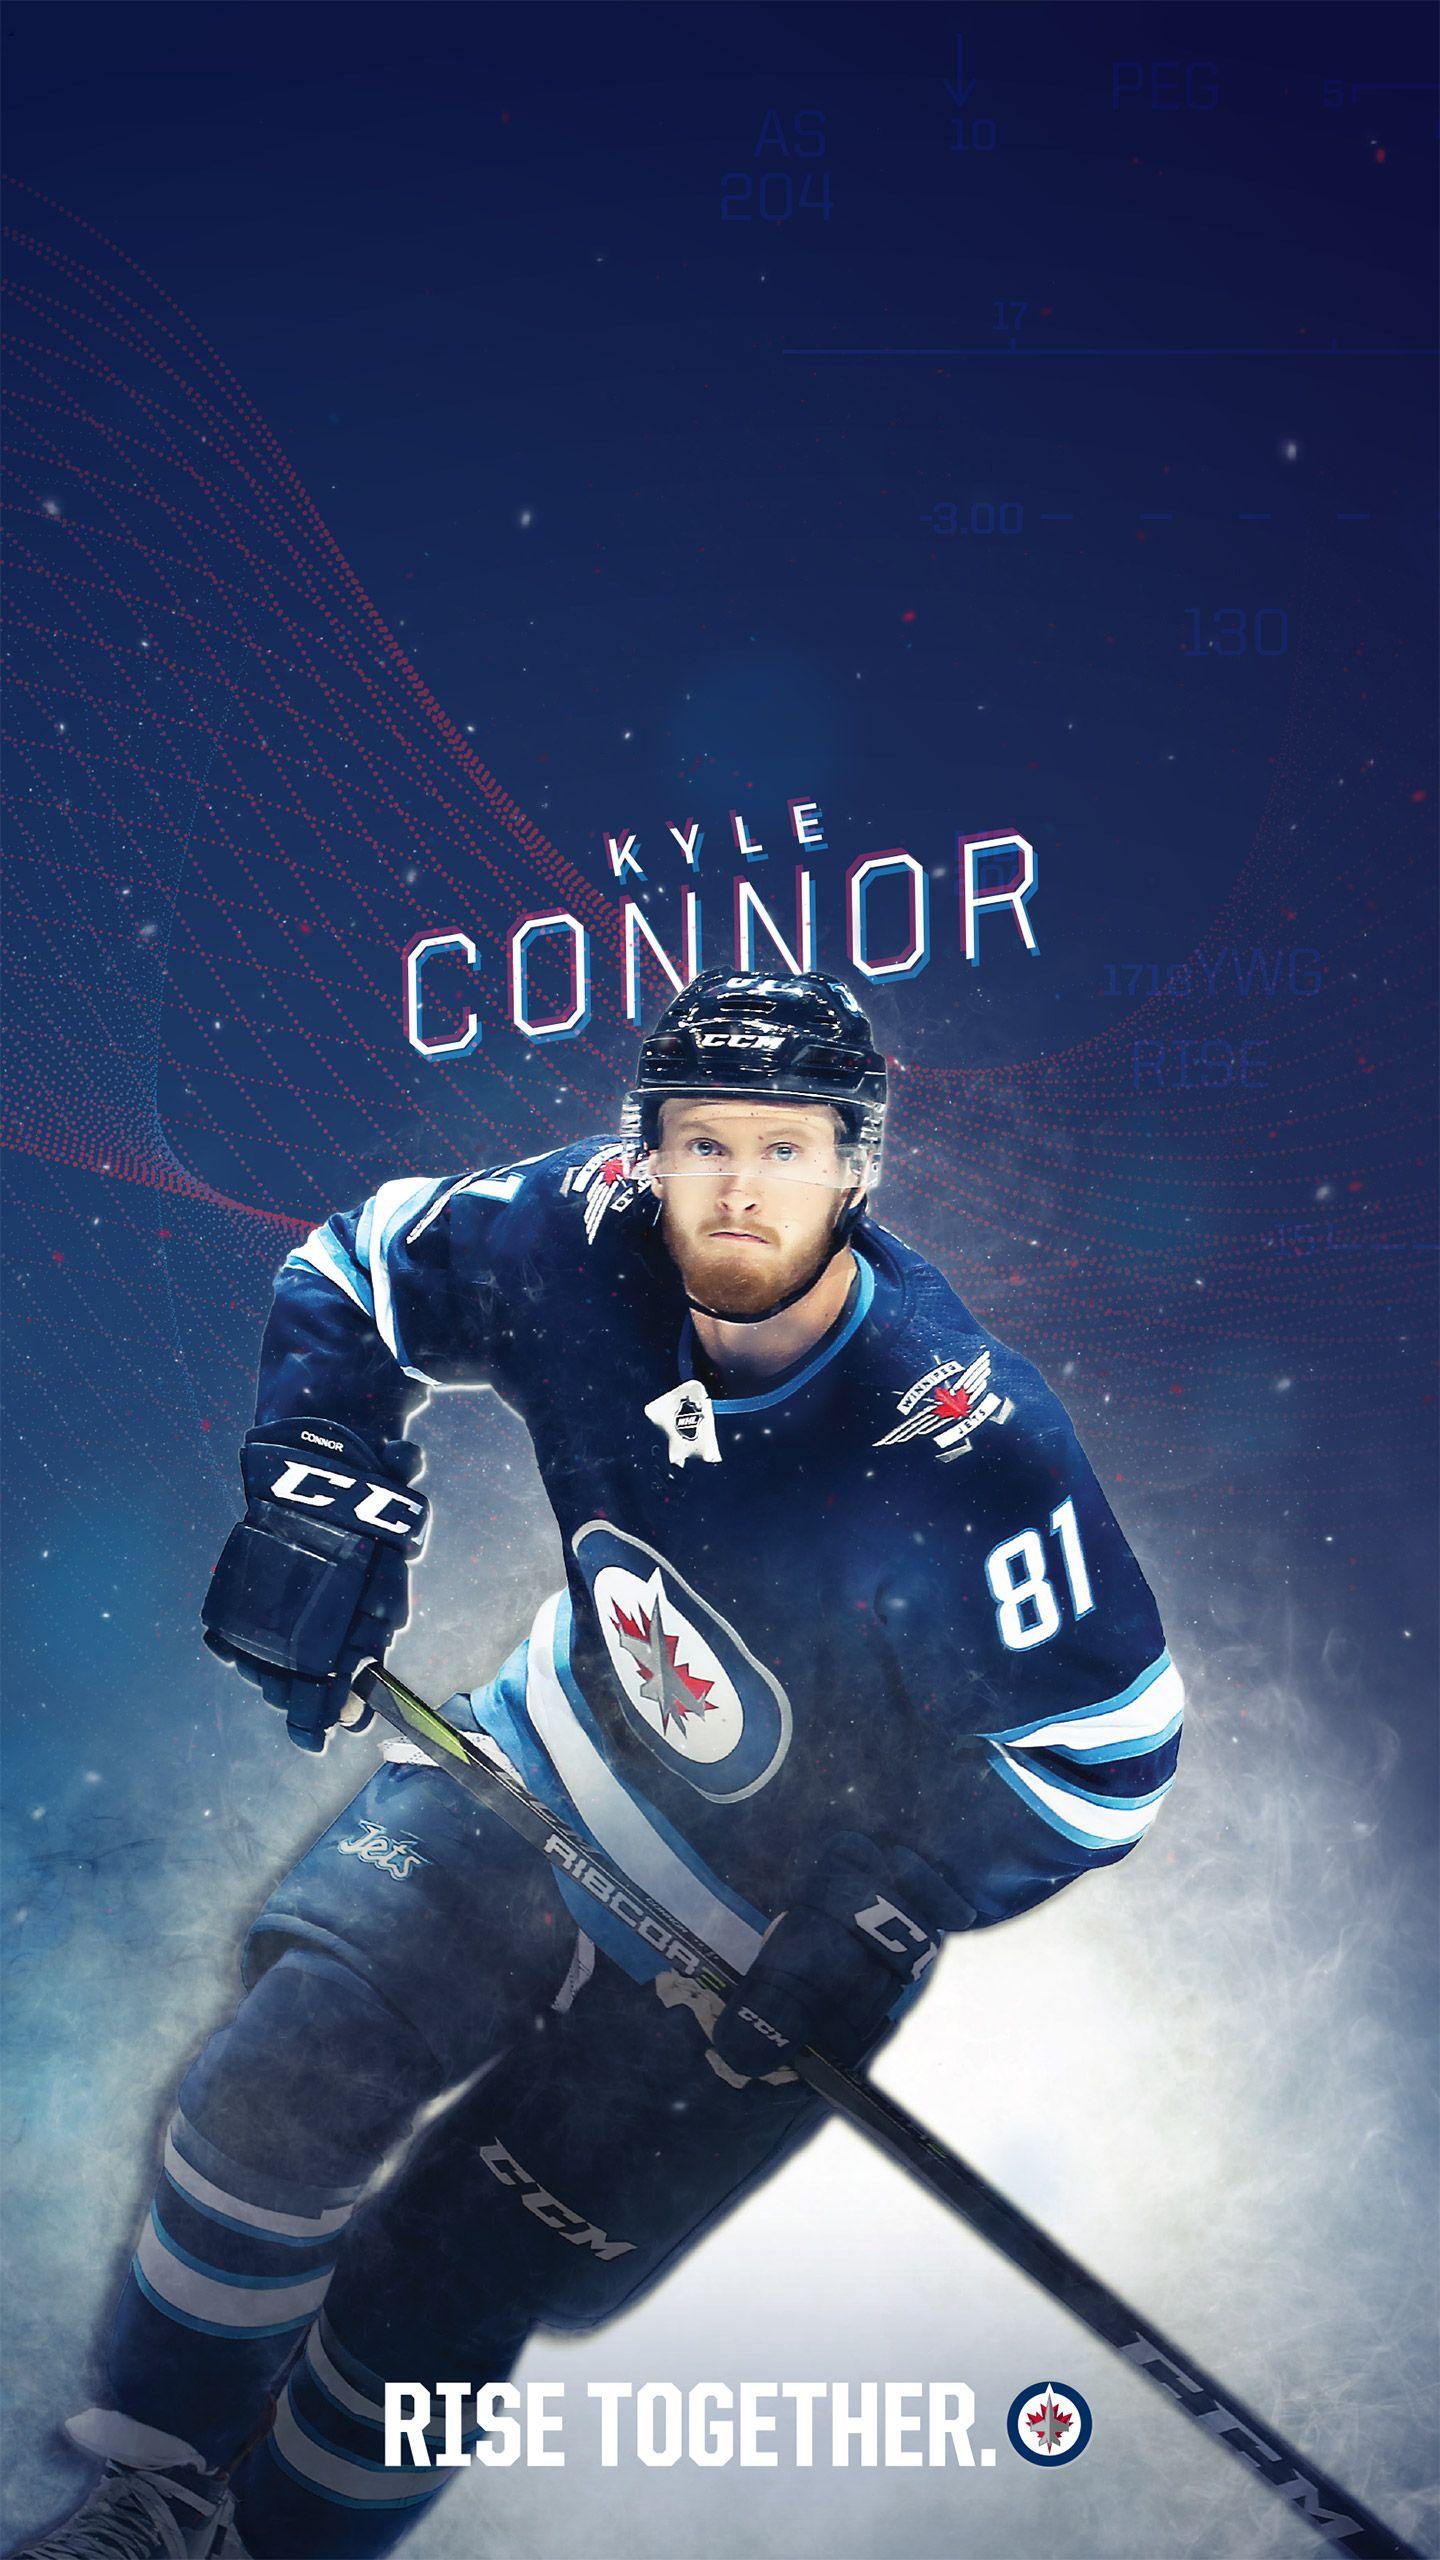 Winnipeg Jets - Winnipeg these wallpapers are for YOU